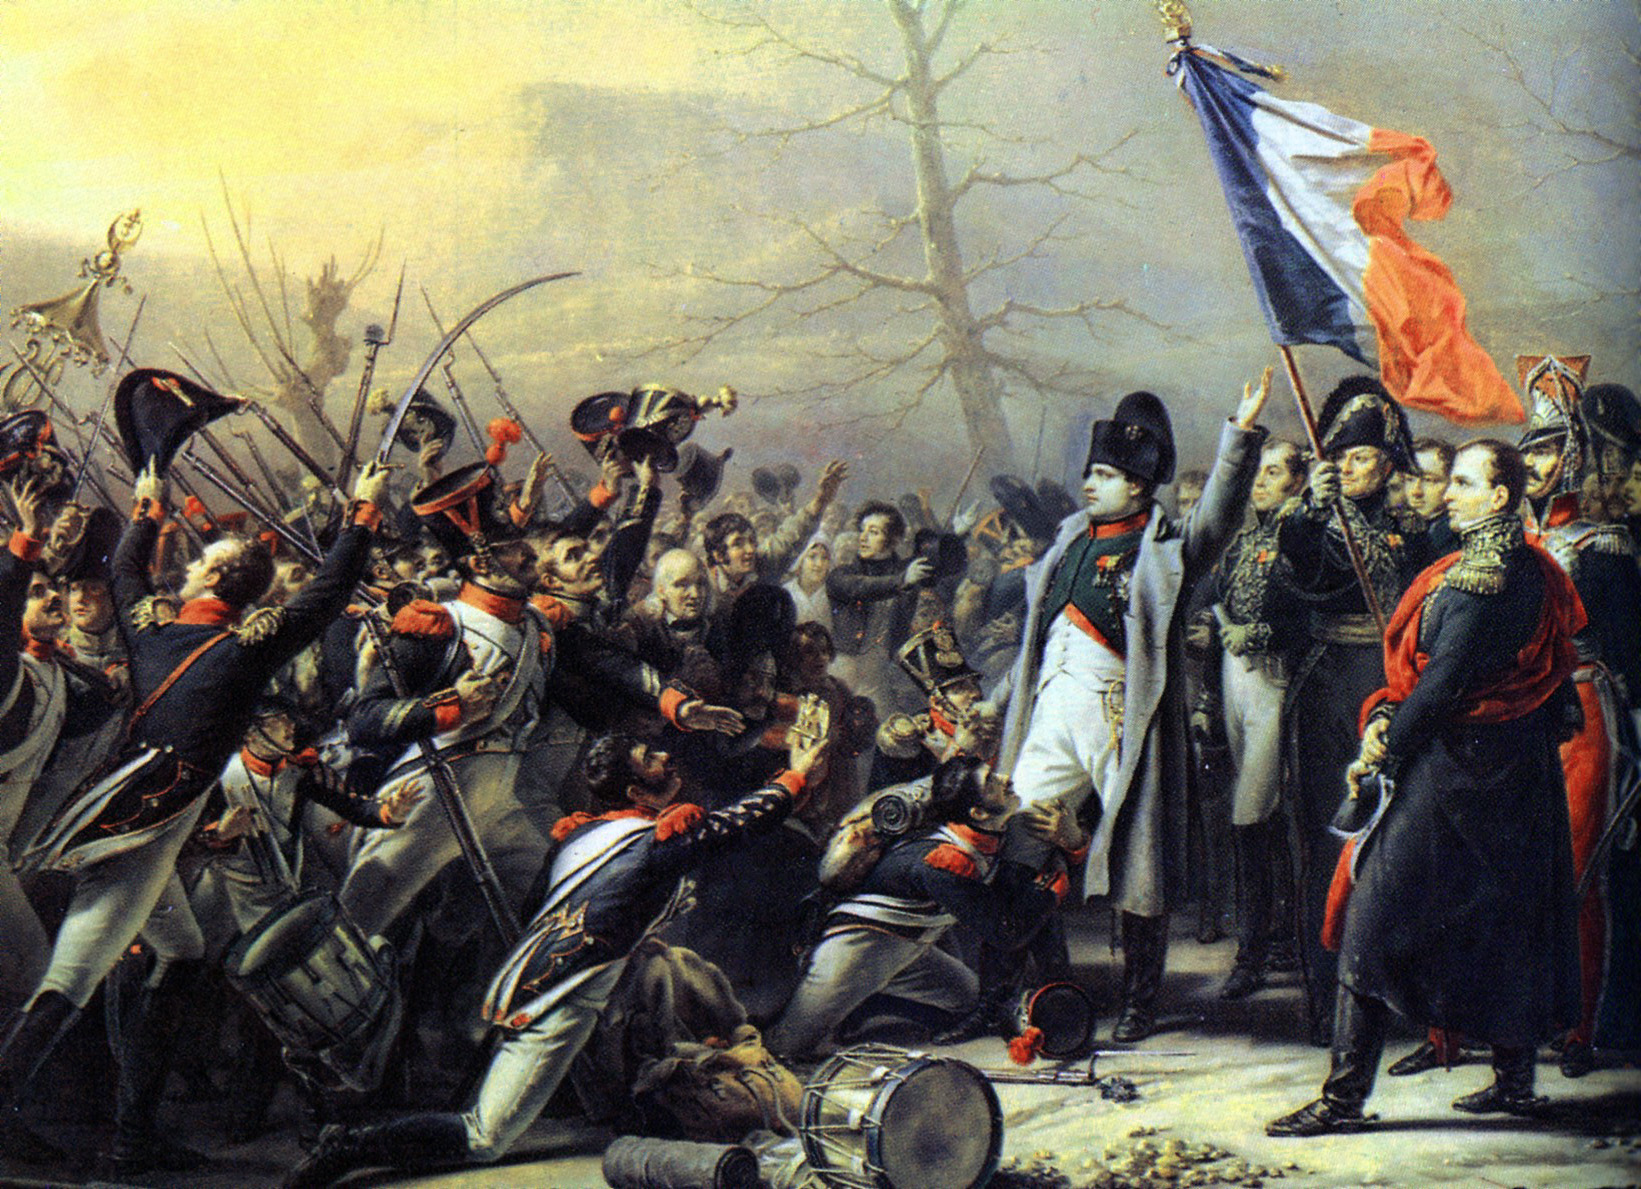 Napoleon’s Hundred Days — Bonaparte and His Army Once Commanded Europe; In the Lead-up to Waterloo, Neither Were Ready for War